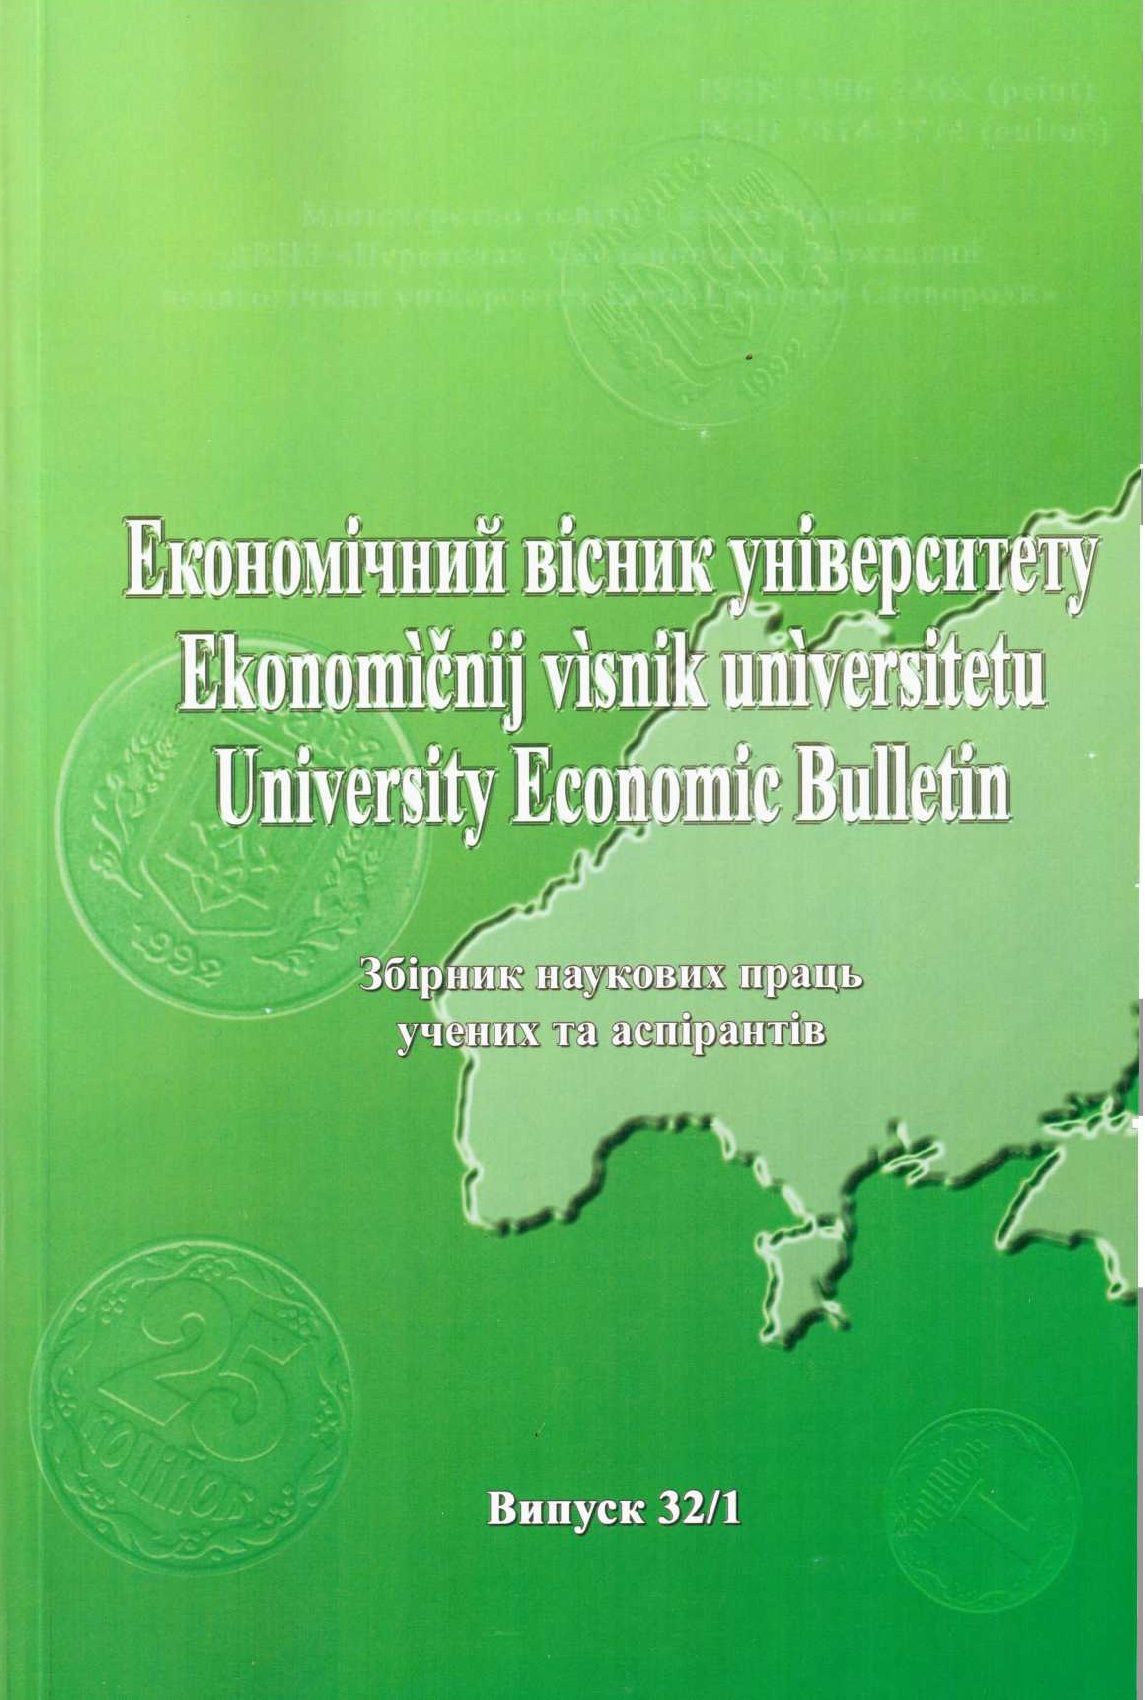 Assessment of threat of macroeconomic and financial stability of national economy Cover Image